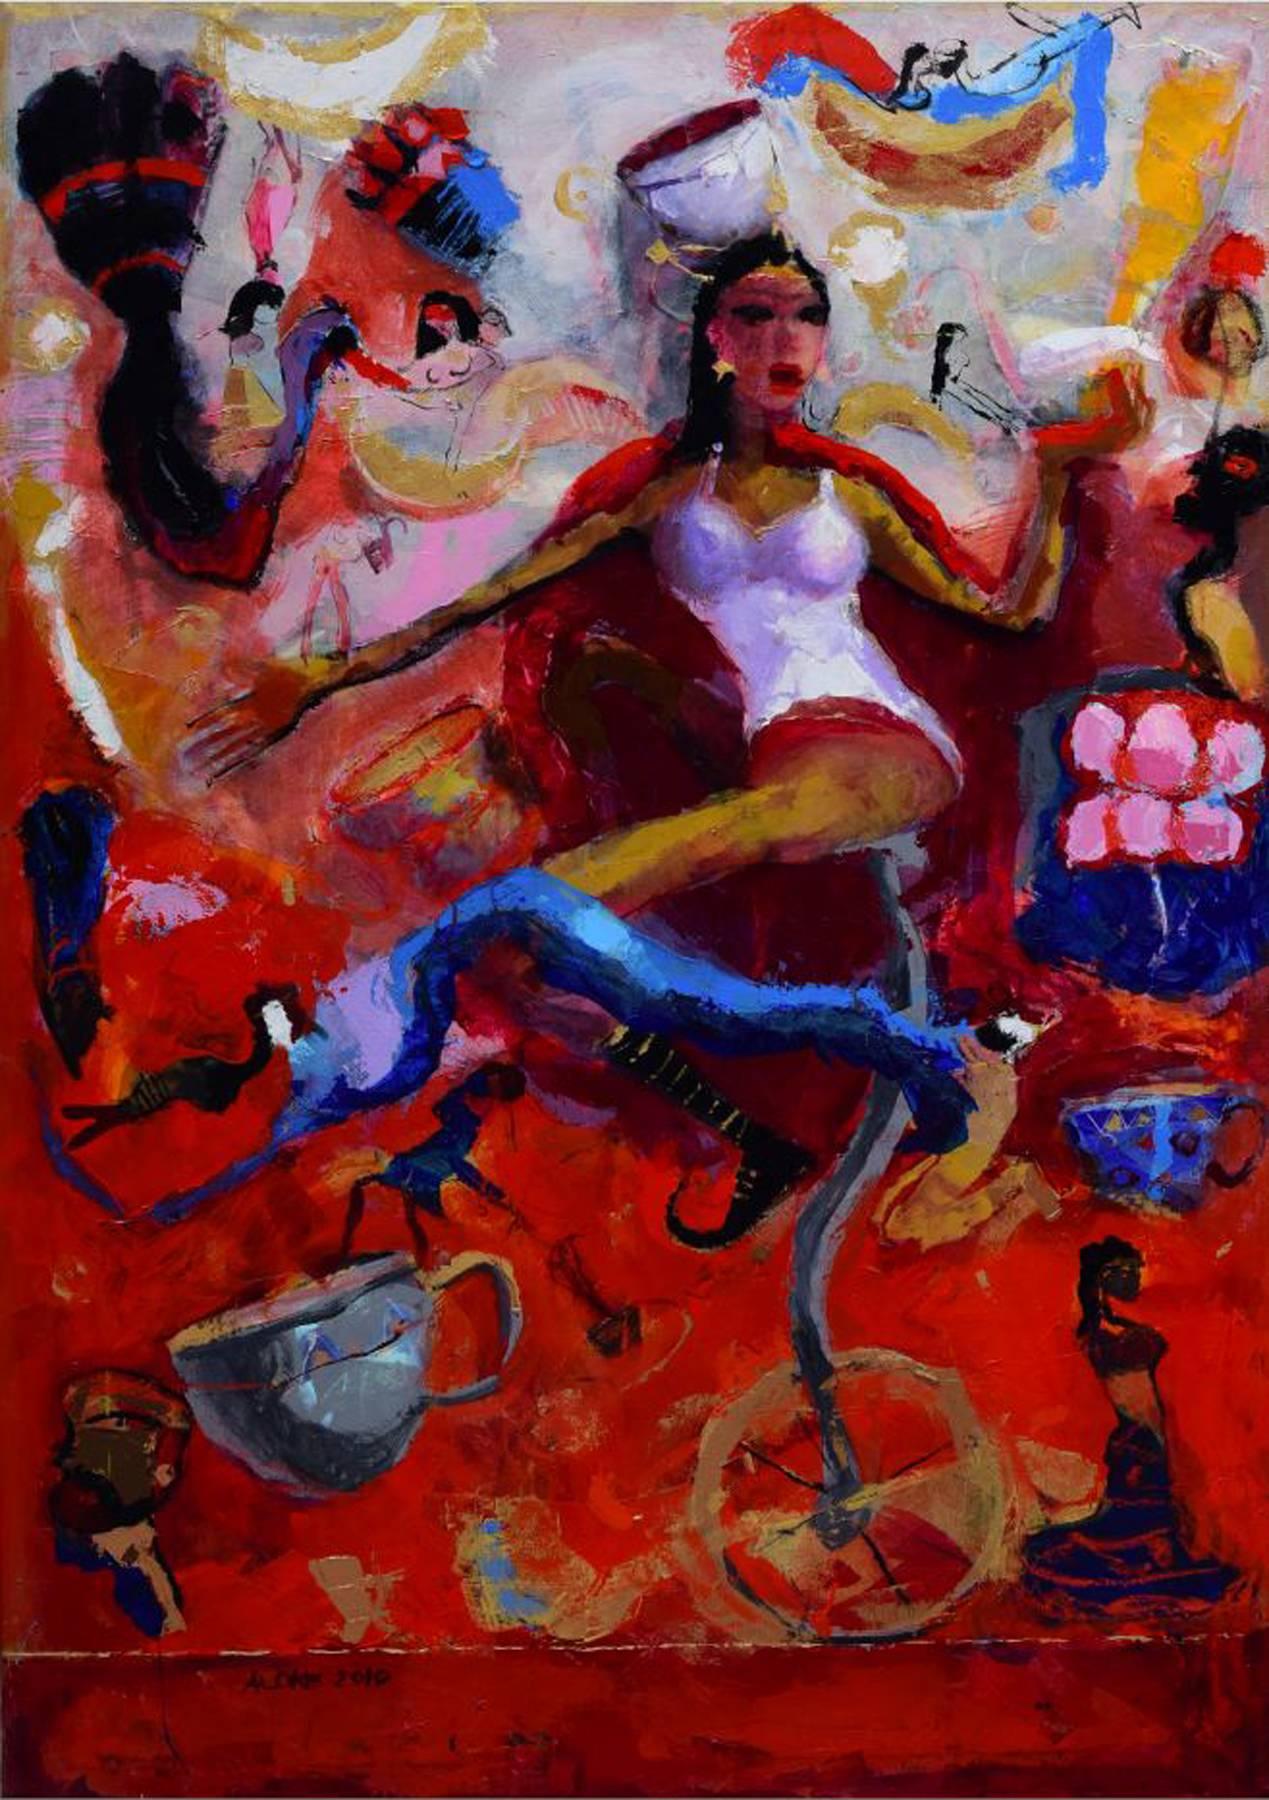 Aloke Sardar Figurative Painting - Circus Rani, Acrylic on canvas by Contemporary Artist "In Stock"